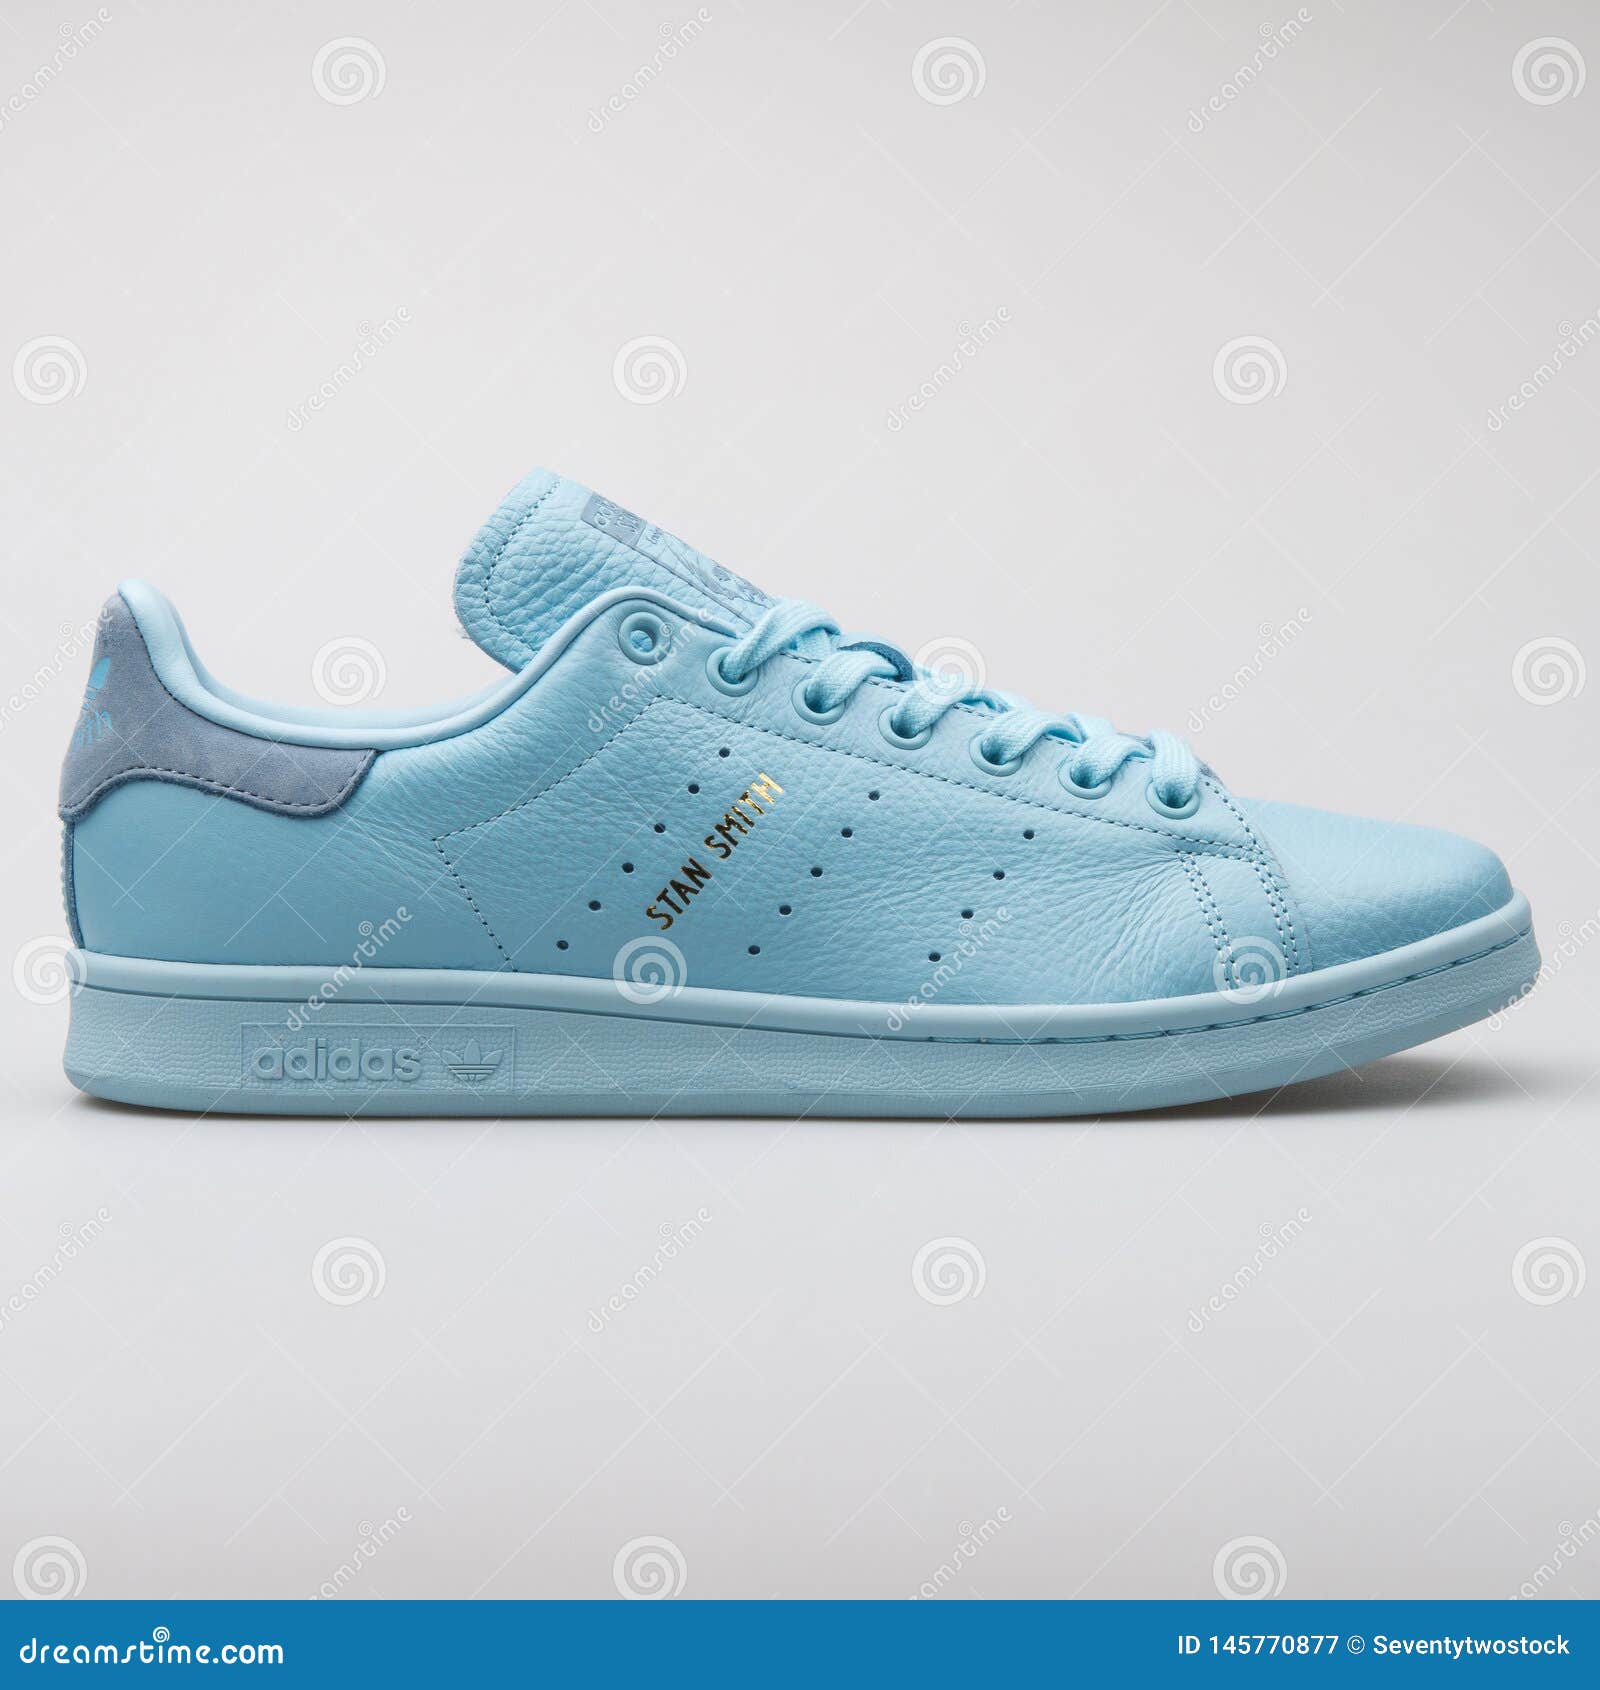 Adidas Stan Smith Blue Sneaker Editorial - Image of smith, equipment: 145770877